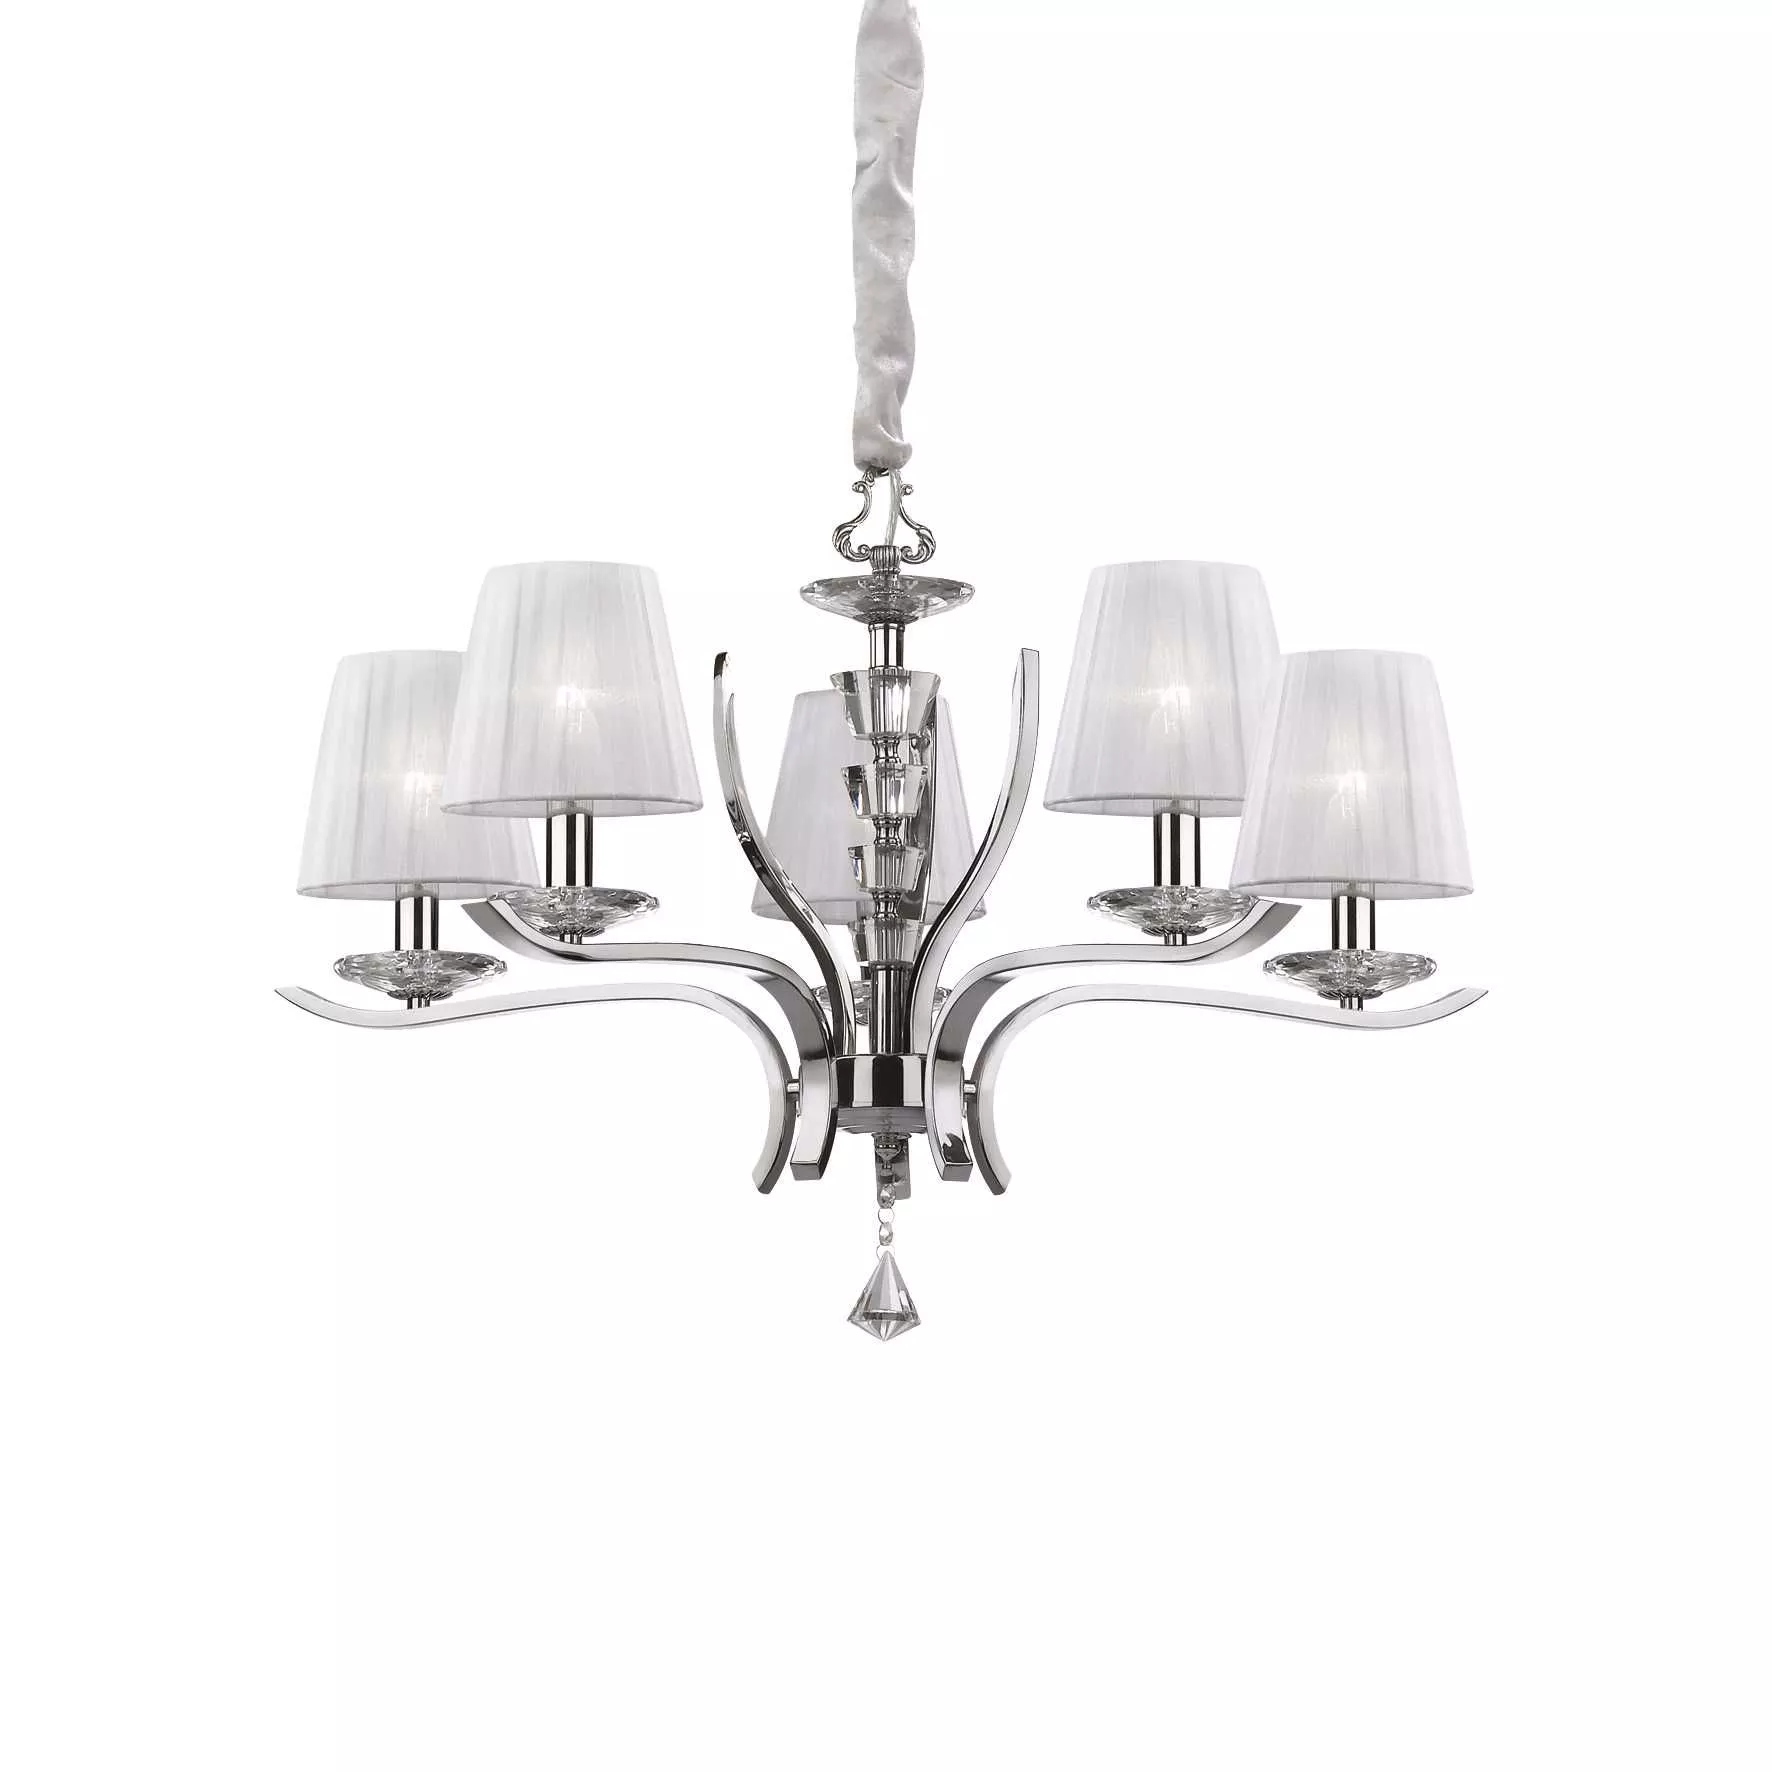 Ideal lux pegaso pendant lamp with shades sp5 5arms - 3C53